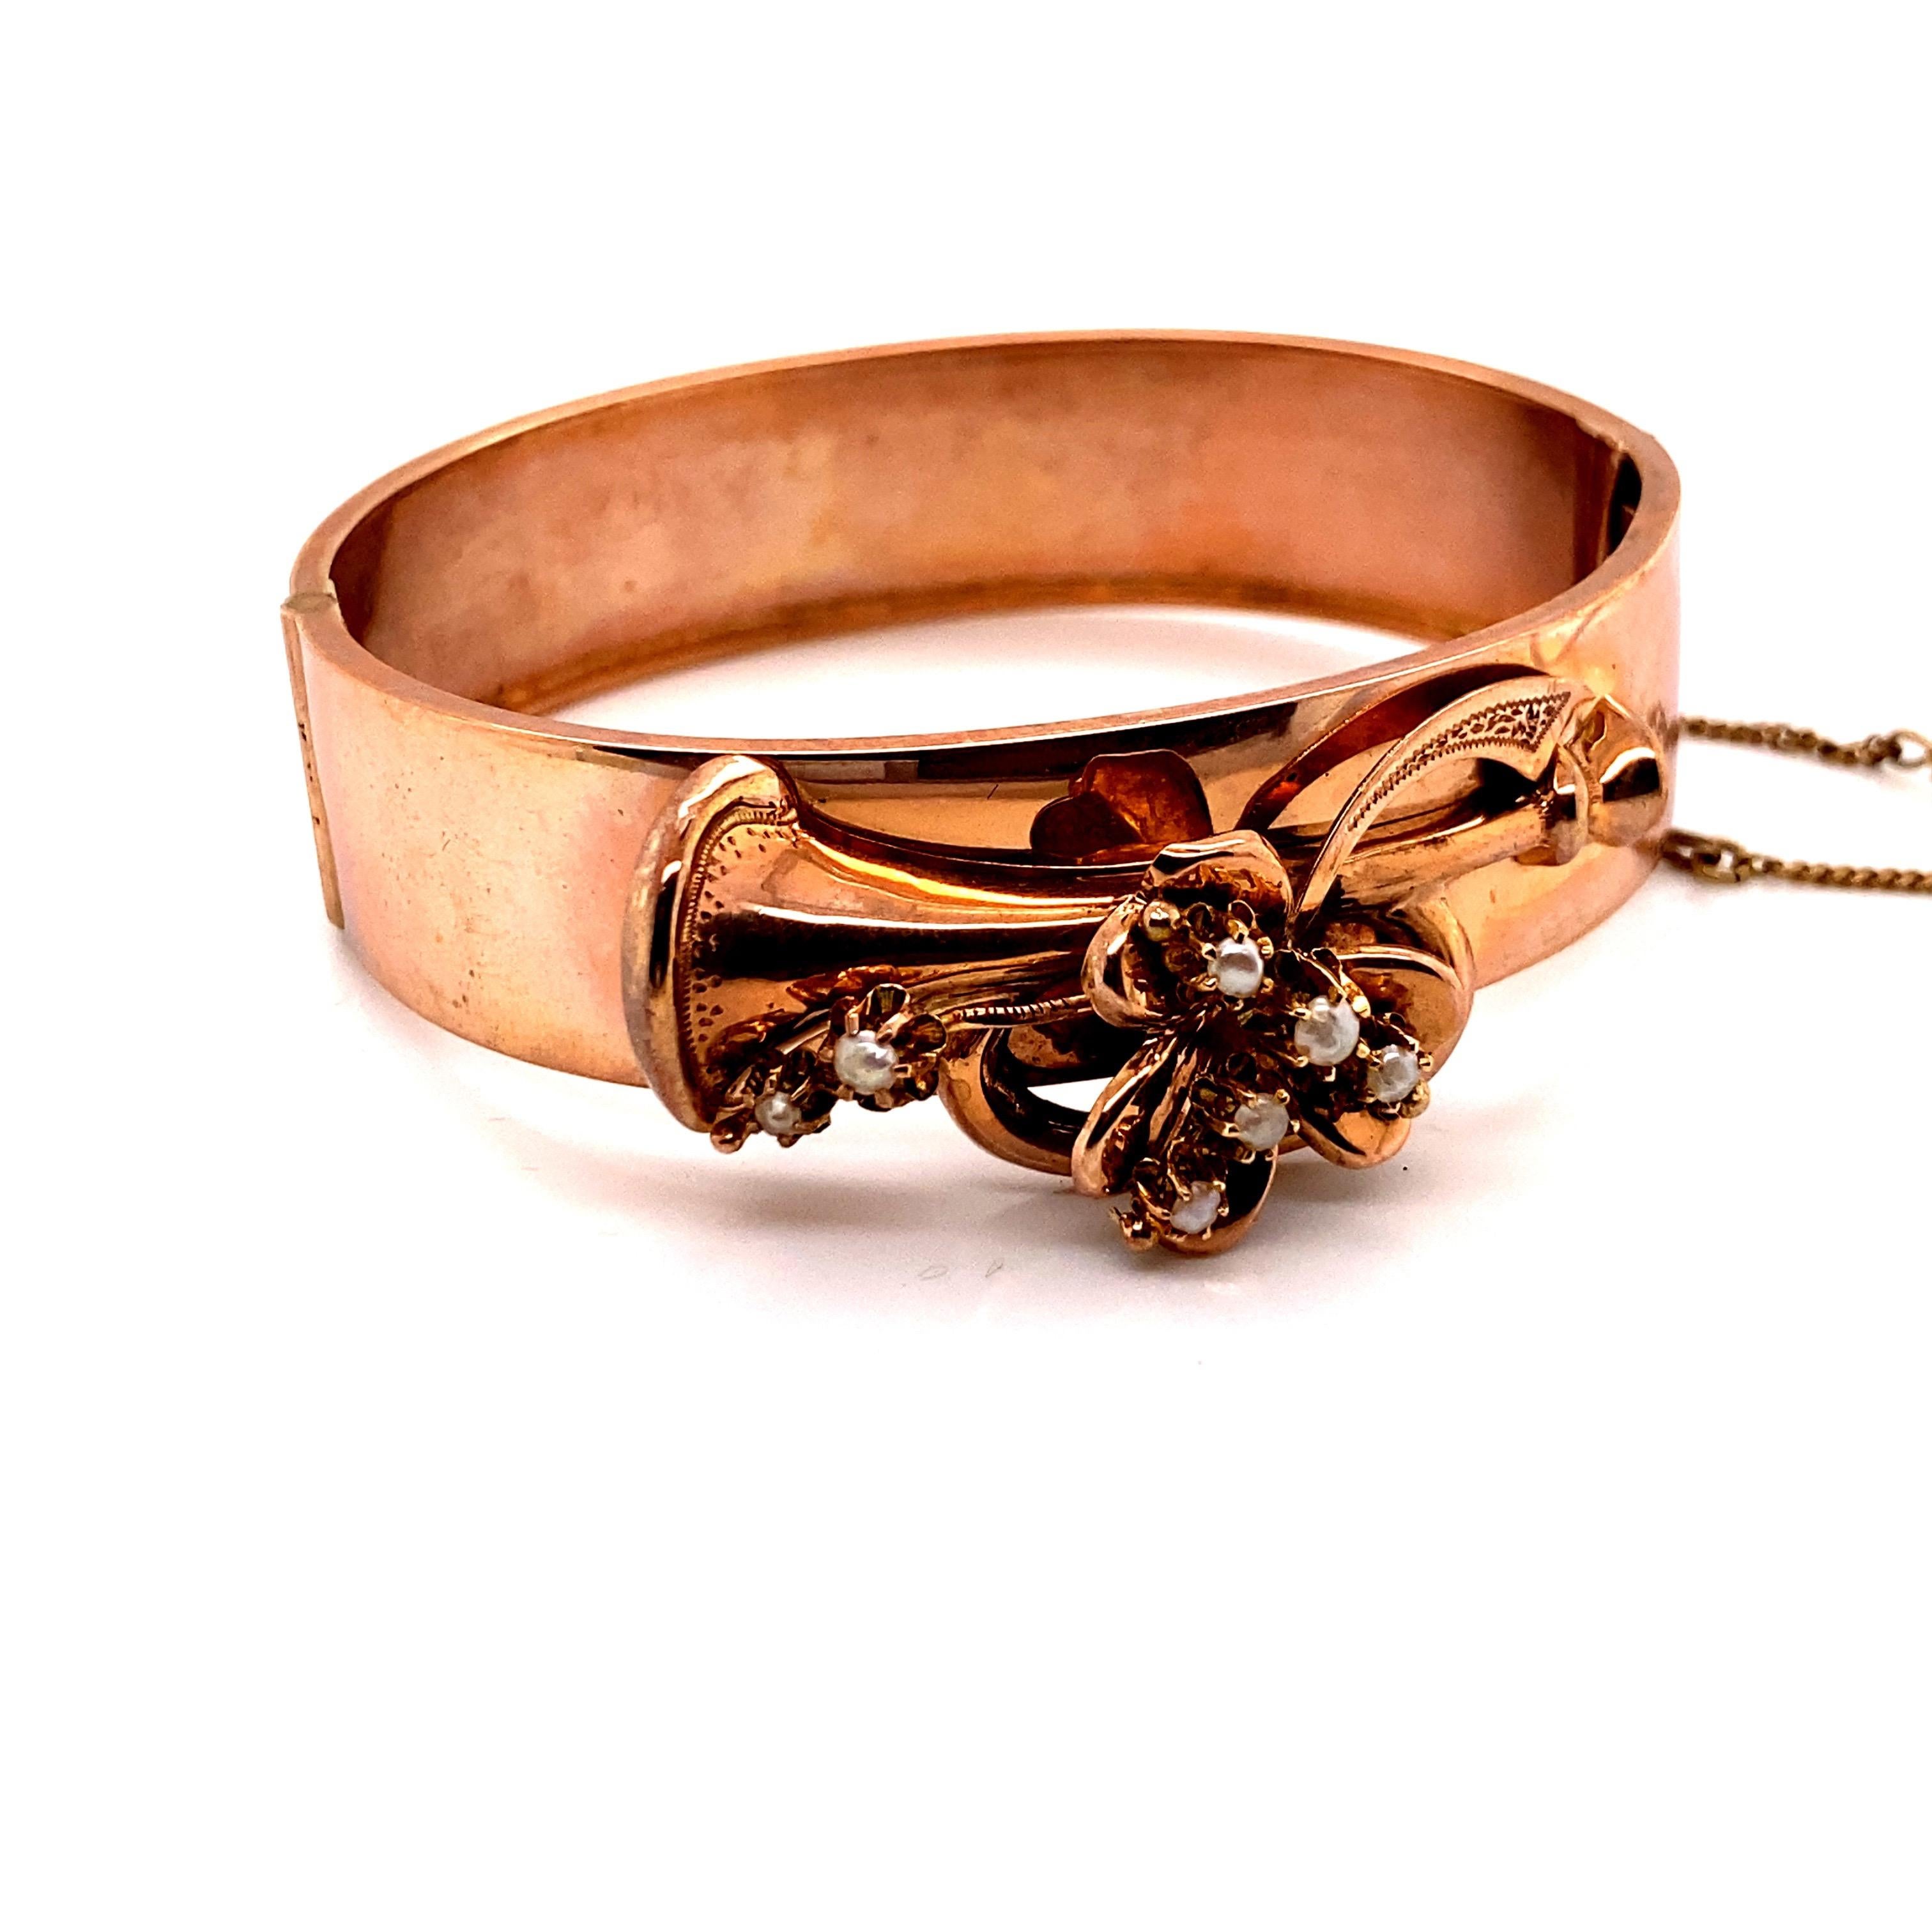 Vintage 1940's 14K Rose Gold Retro Bangle Bracelet with Trumpet Design - The trumpet is accented with 7 seed pearls. The width of the bangle is 15mm. The inside diameter is 2 inches high and 2.25 inches wide. The bracelet weighs 13 grams. 